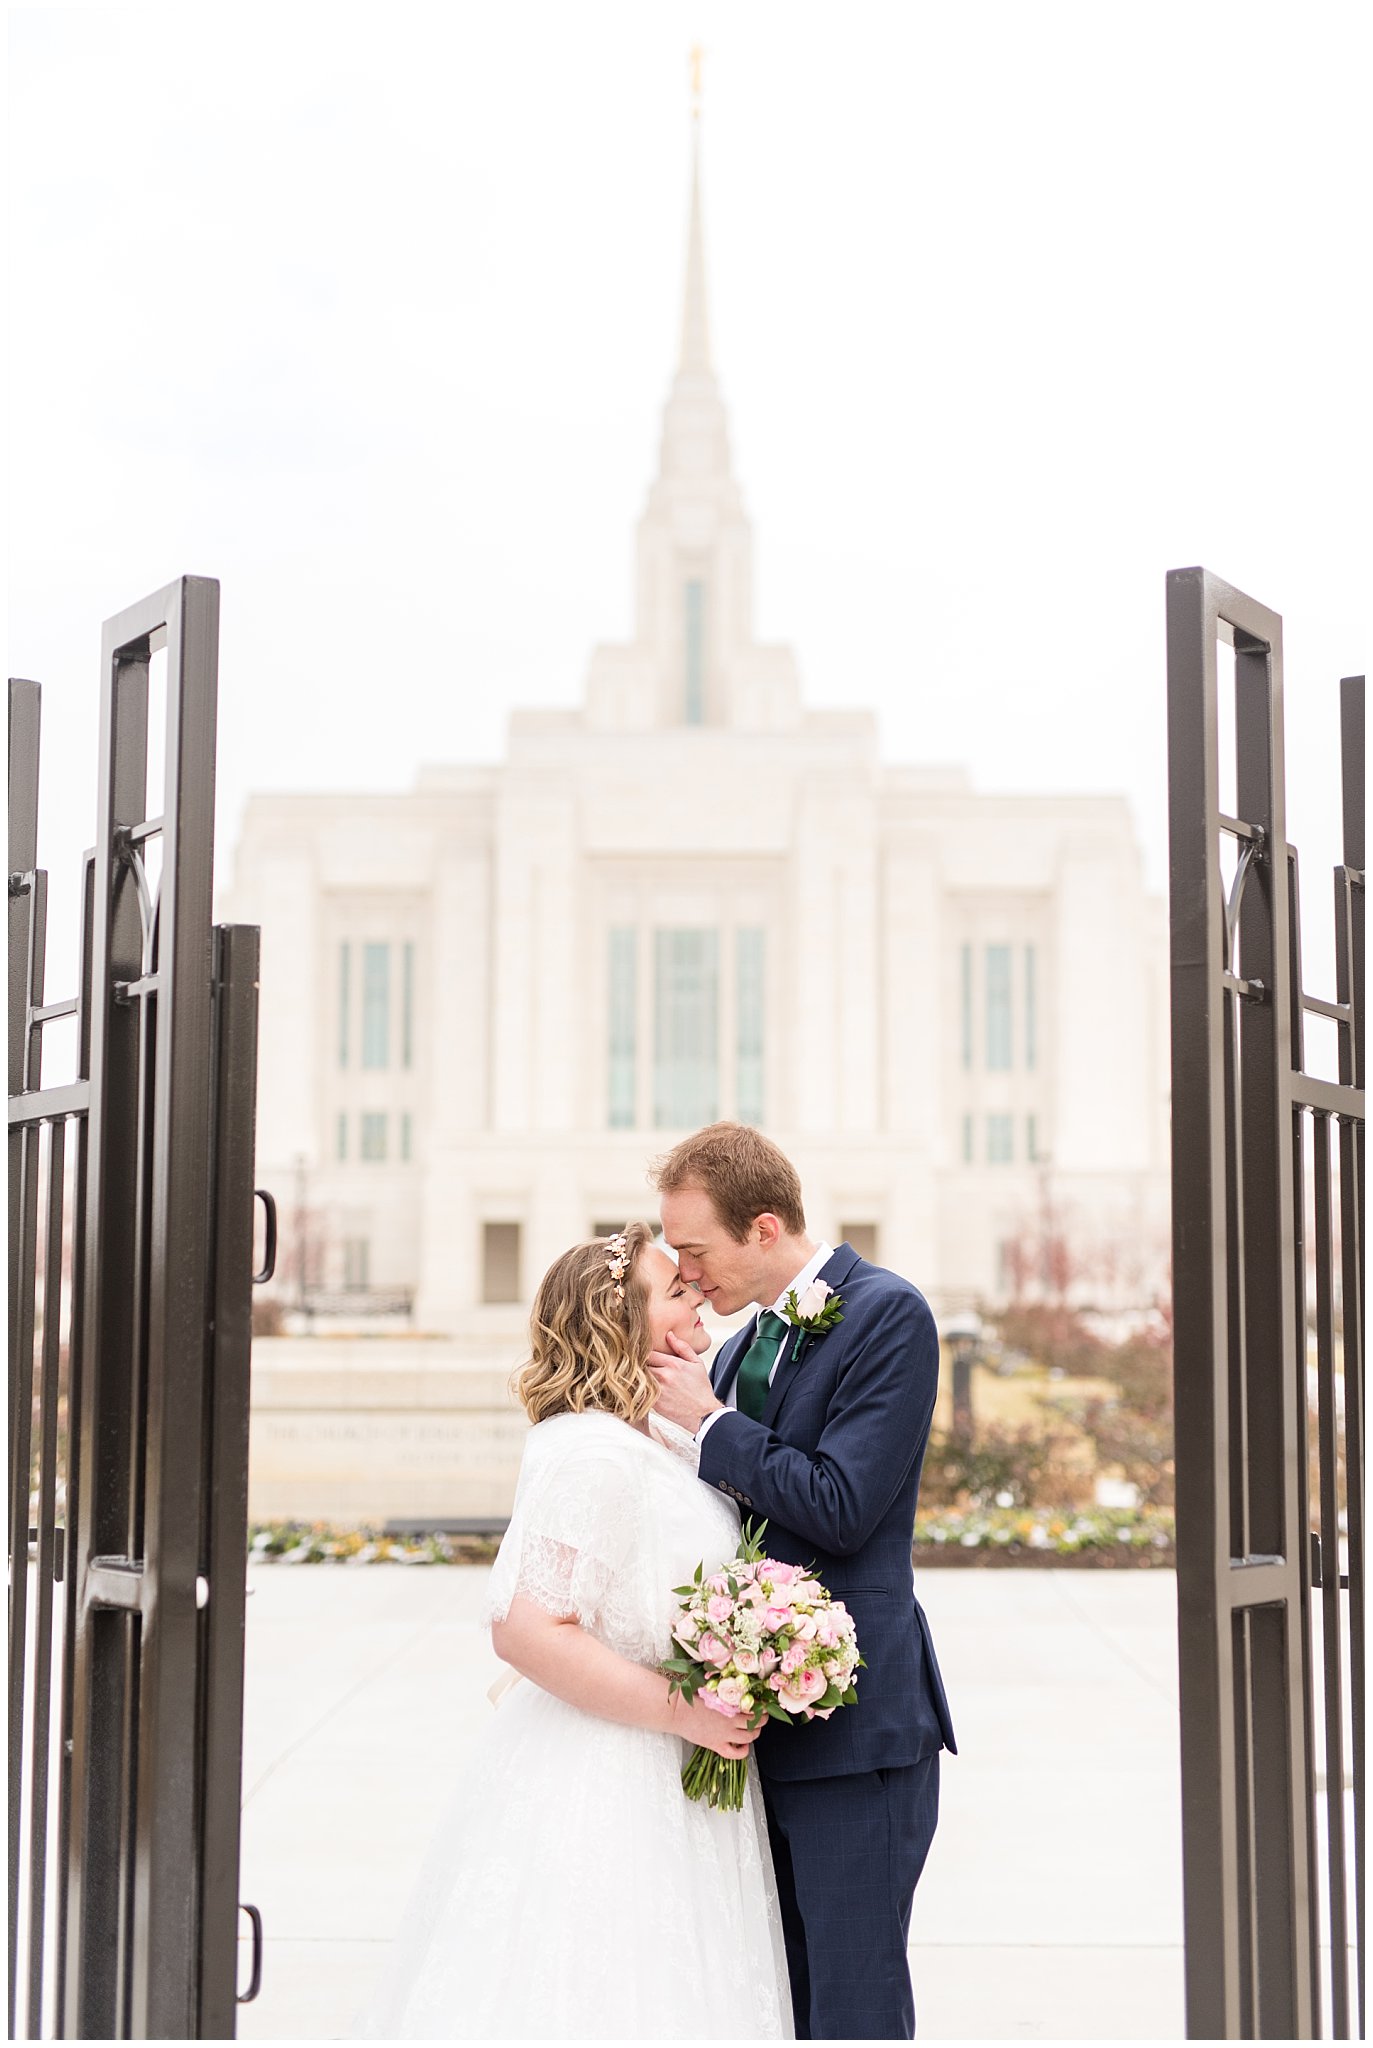 Bride and groom at Ogden temple gate | Ogden Temple Winter Wedding | Emerald Green and Pink Wedding | Jessie and Dallin Photography